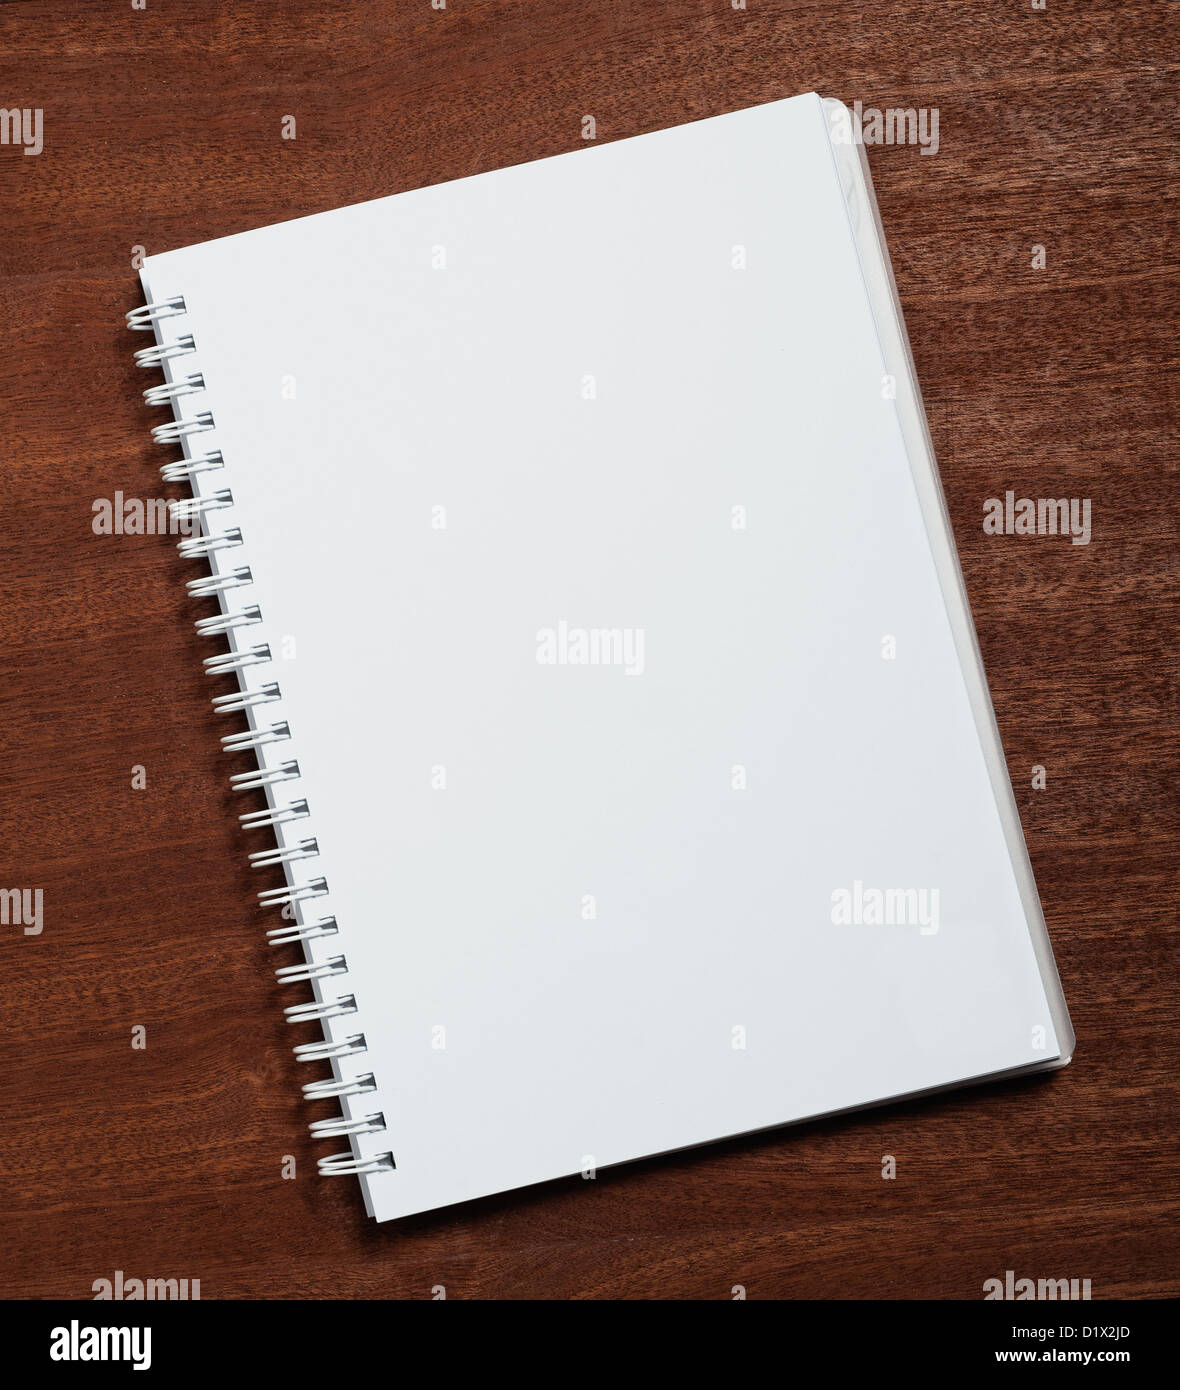 Notebook on wooden background. Stock Photo